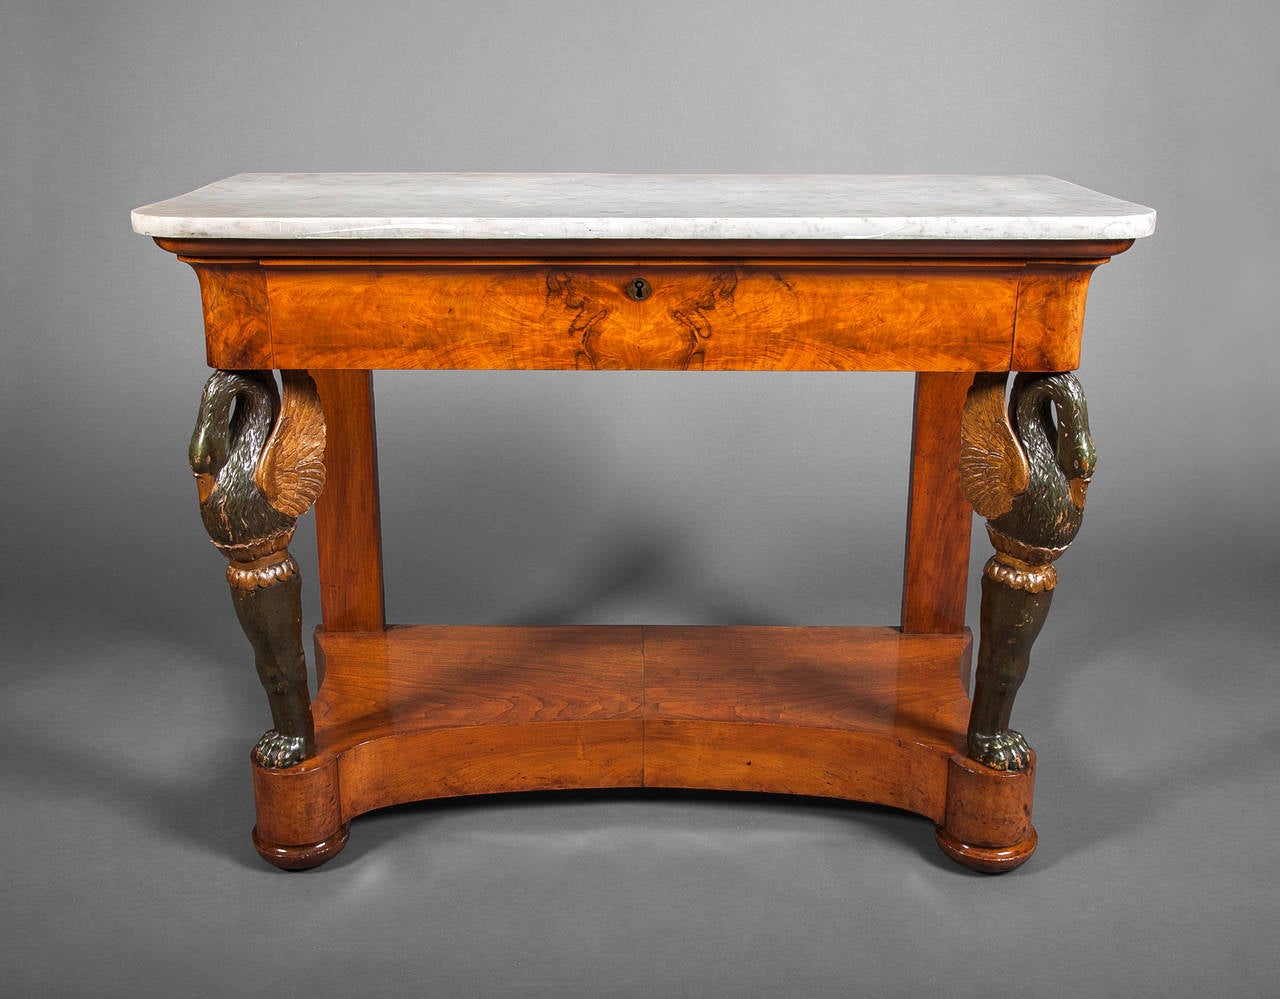 Biedermeier Continental console table with carved swan legs and a single drawer.